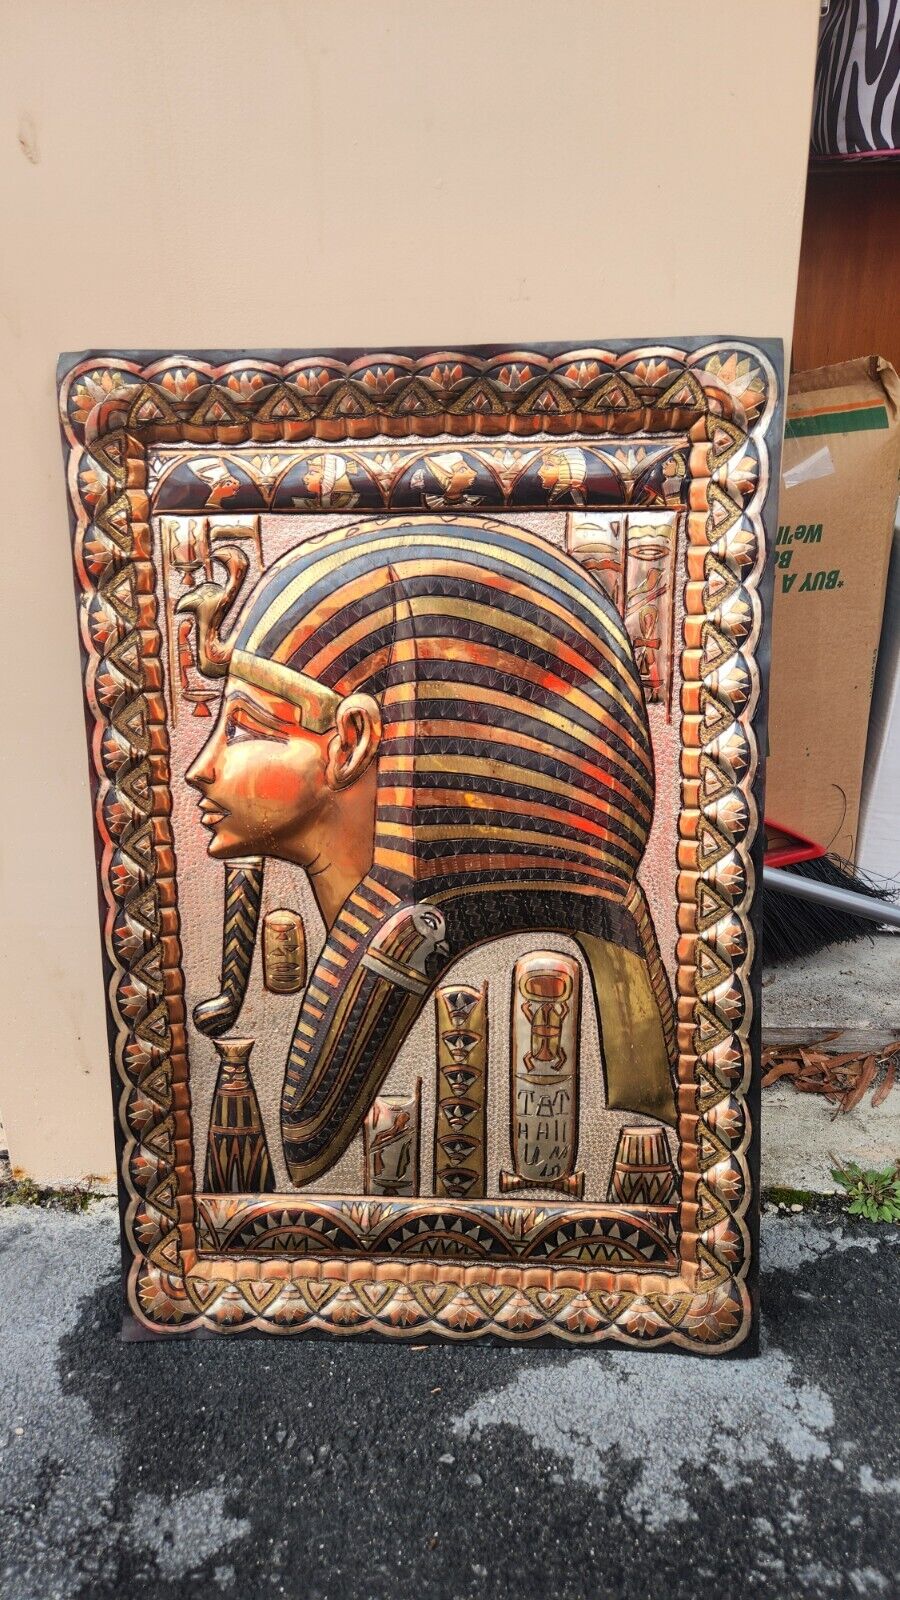 Made In Egypt Handmade Metal Wall Picture Of King-Tout-Anezh-Amoon 20x20